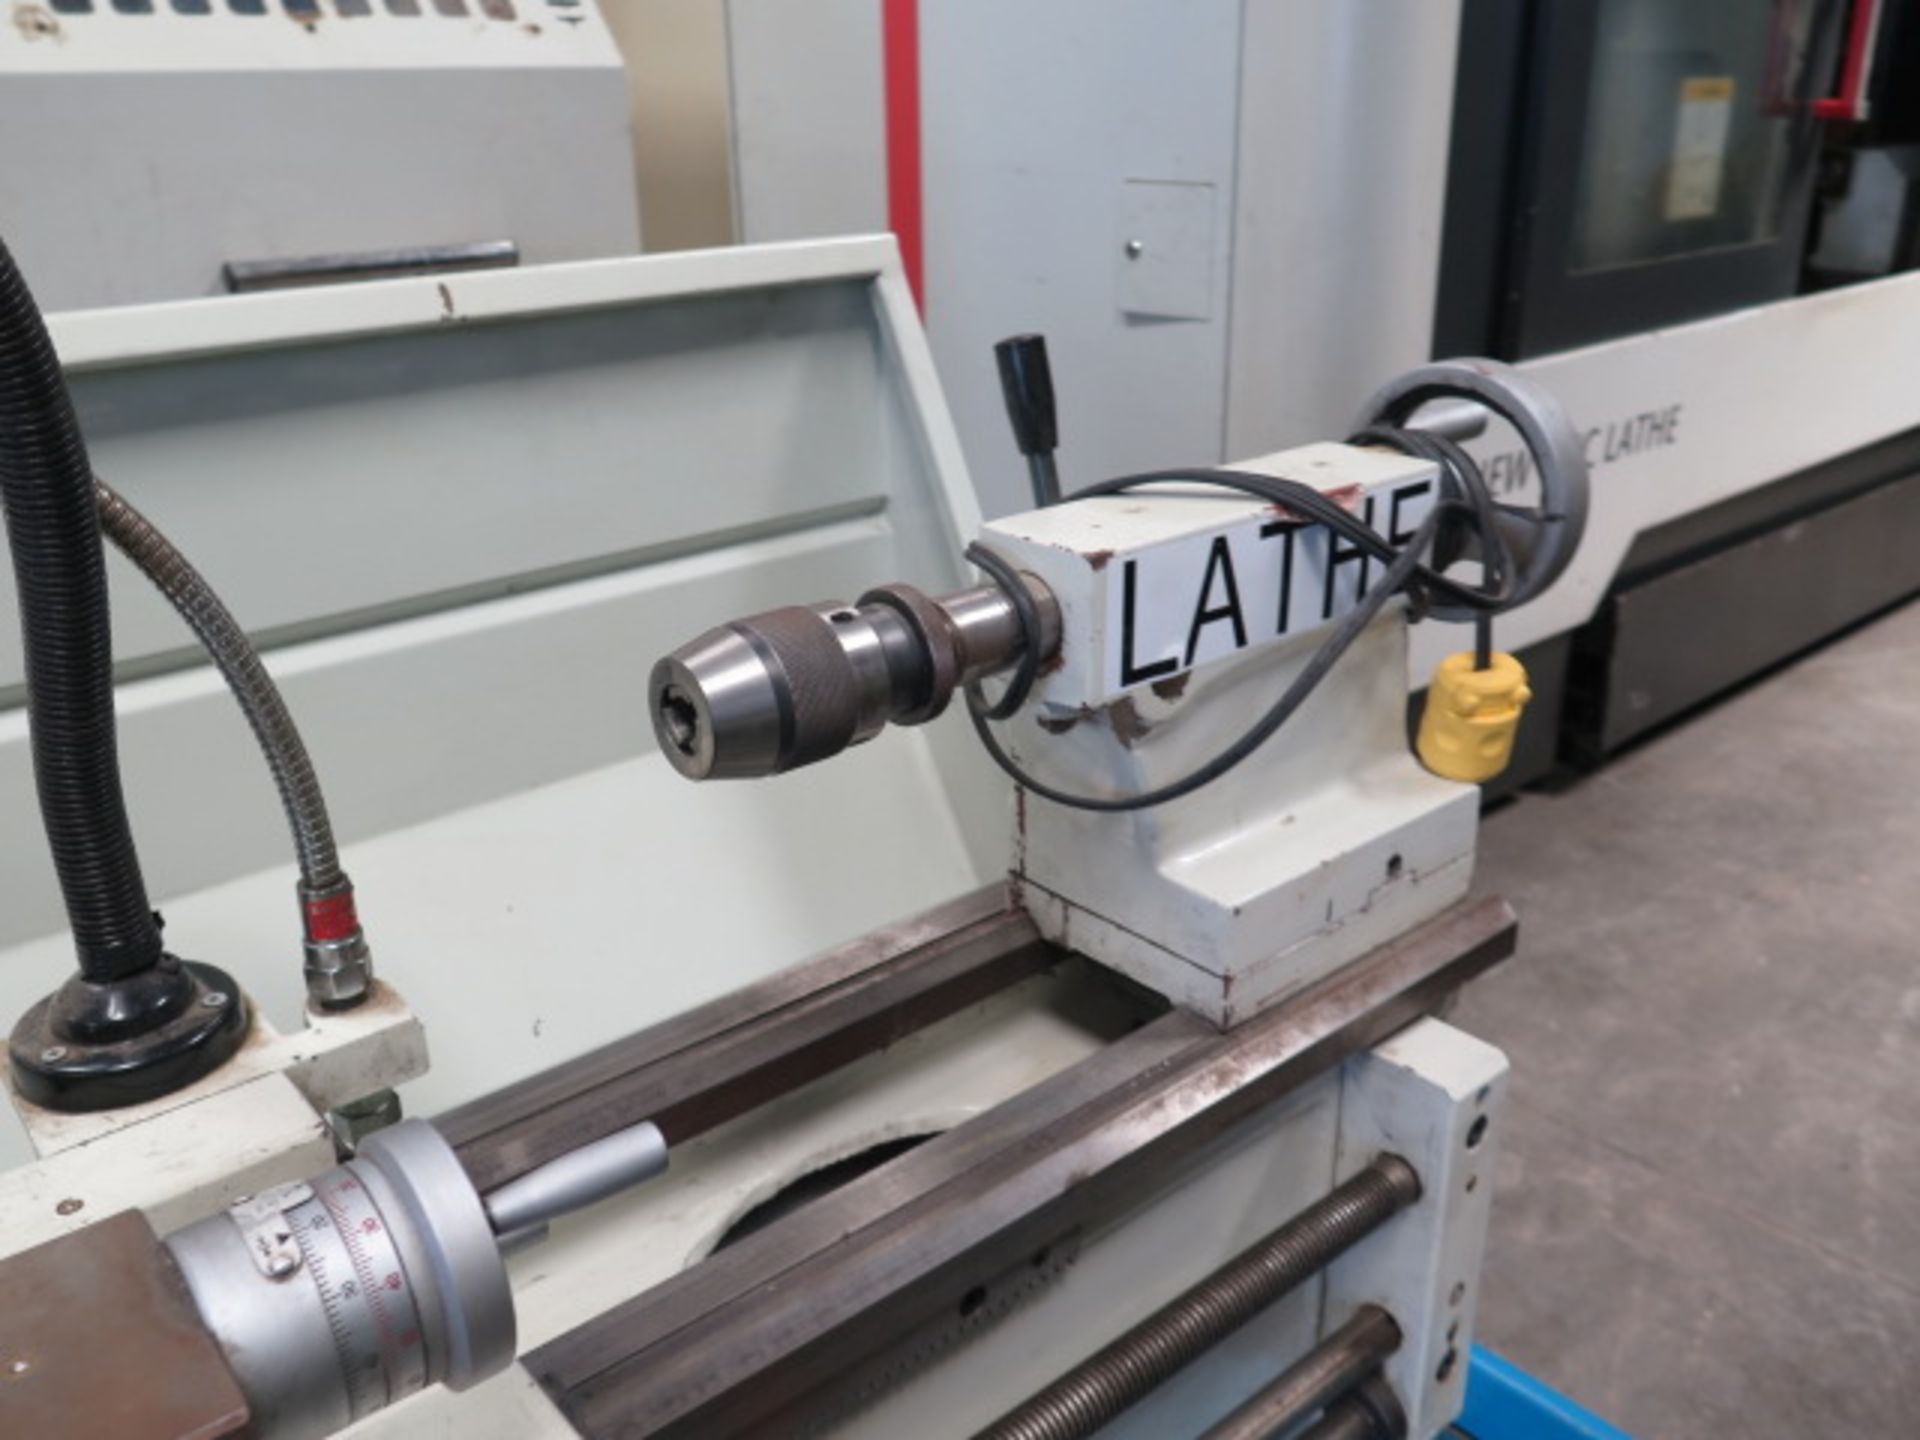 Acra Turn FI-1340 GSM 13" x 40" Geared Gap Bed Lathe w/ 70-2000 RPM, Inch/mm Threading, SOLD AS IS - Image 7 of 8